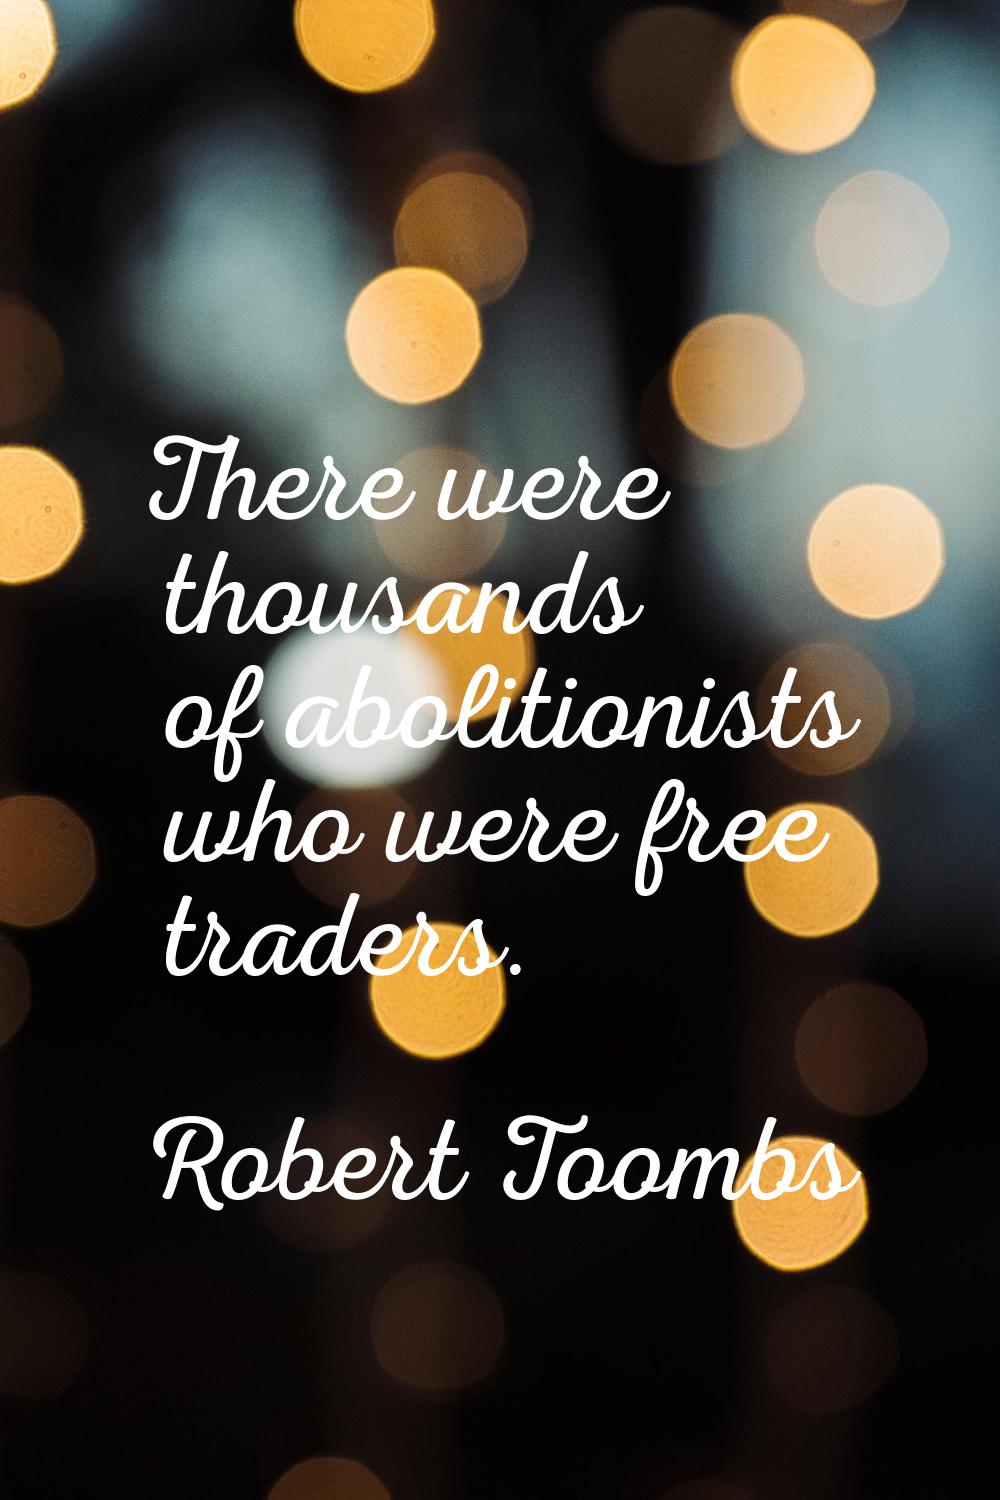 There were thousands of abolitionists who were free traders.